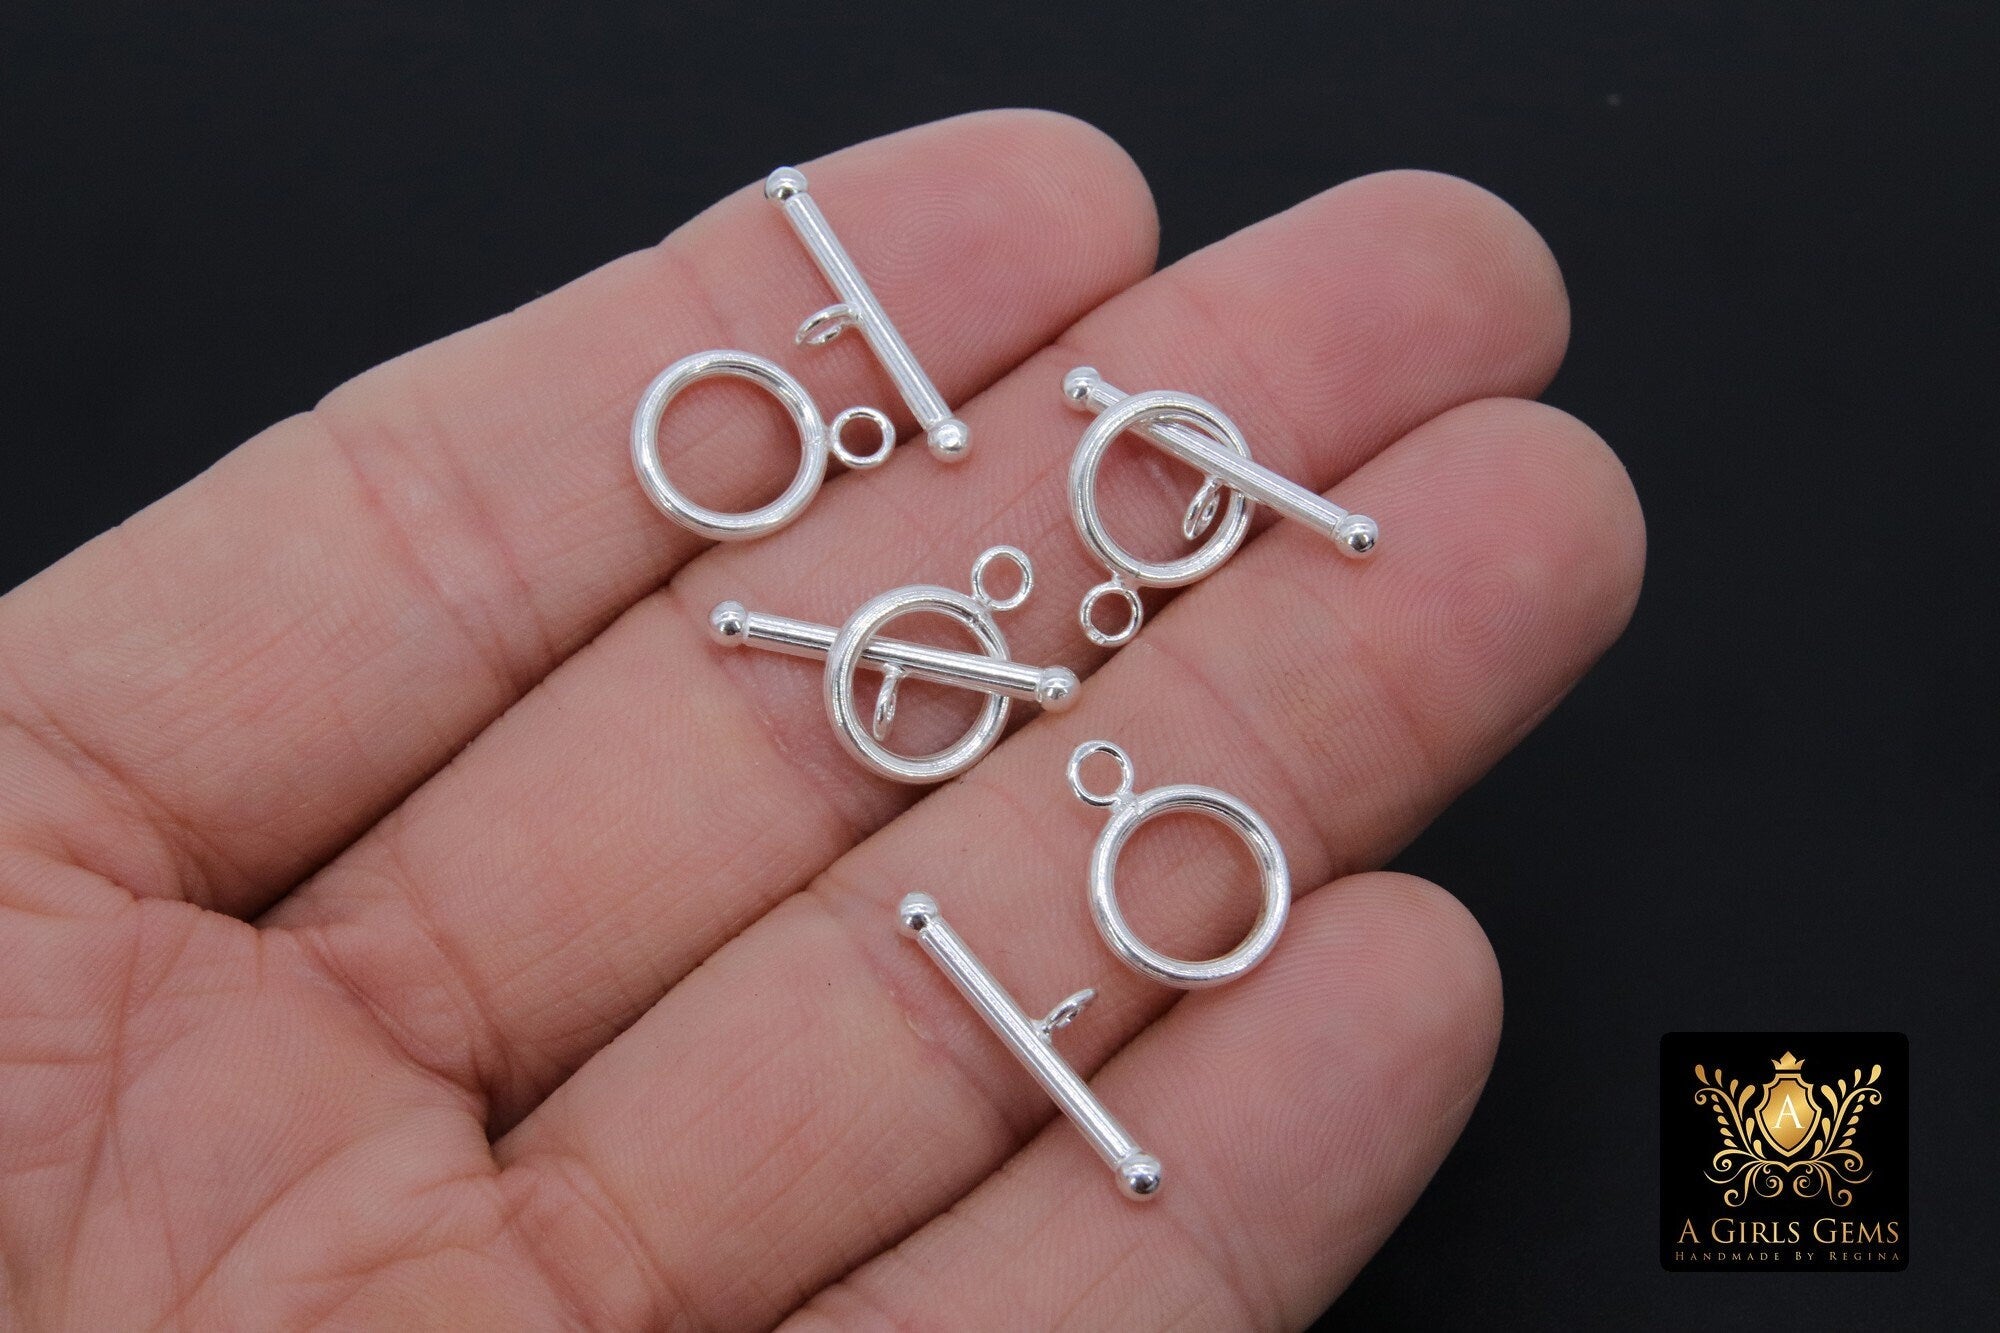 925 Sterling Silver Toggle Clasp Set, Ball End 16 x 12 mm Toggle Ring #744, 22 mm Thick T Bar Stamped 925 Clasps